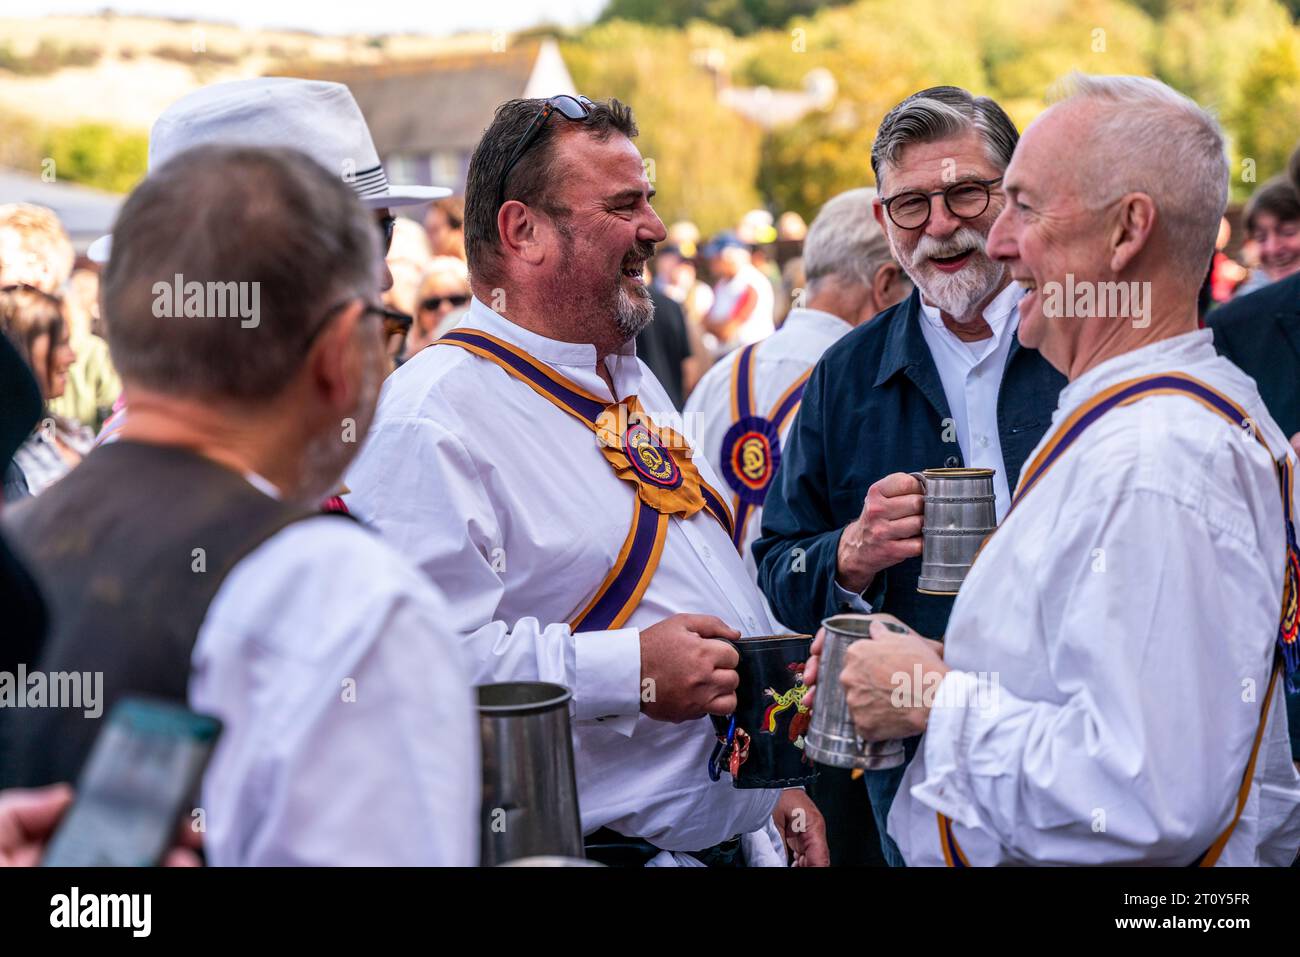 Members of The Brighton Morris Team At The Annual 'Dancing In The Old,' Celebration, Lewes, East Sussex, UK Stock Photo